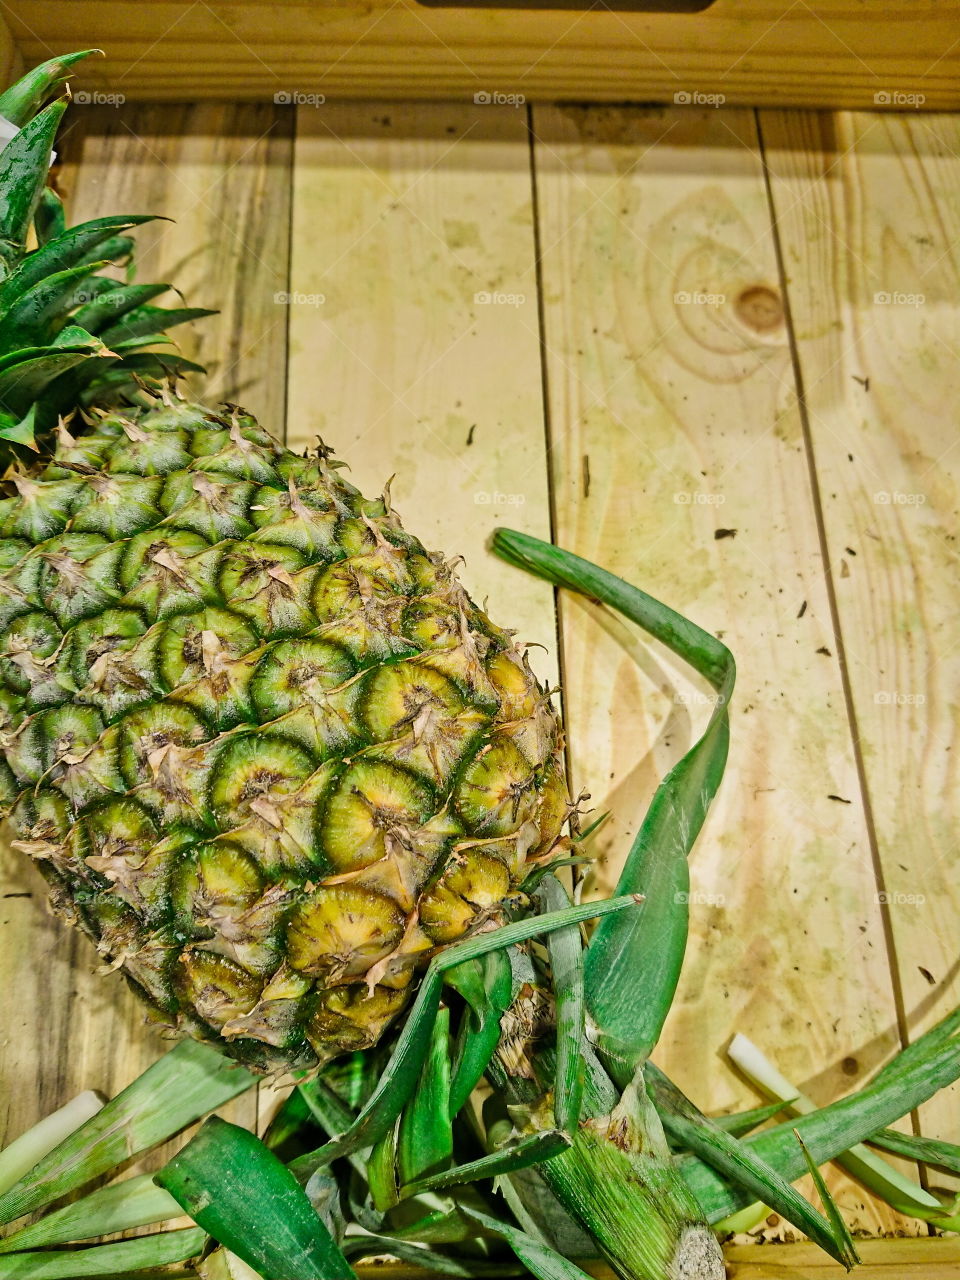 Pineapples in​ box.